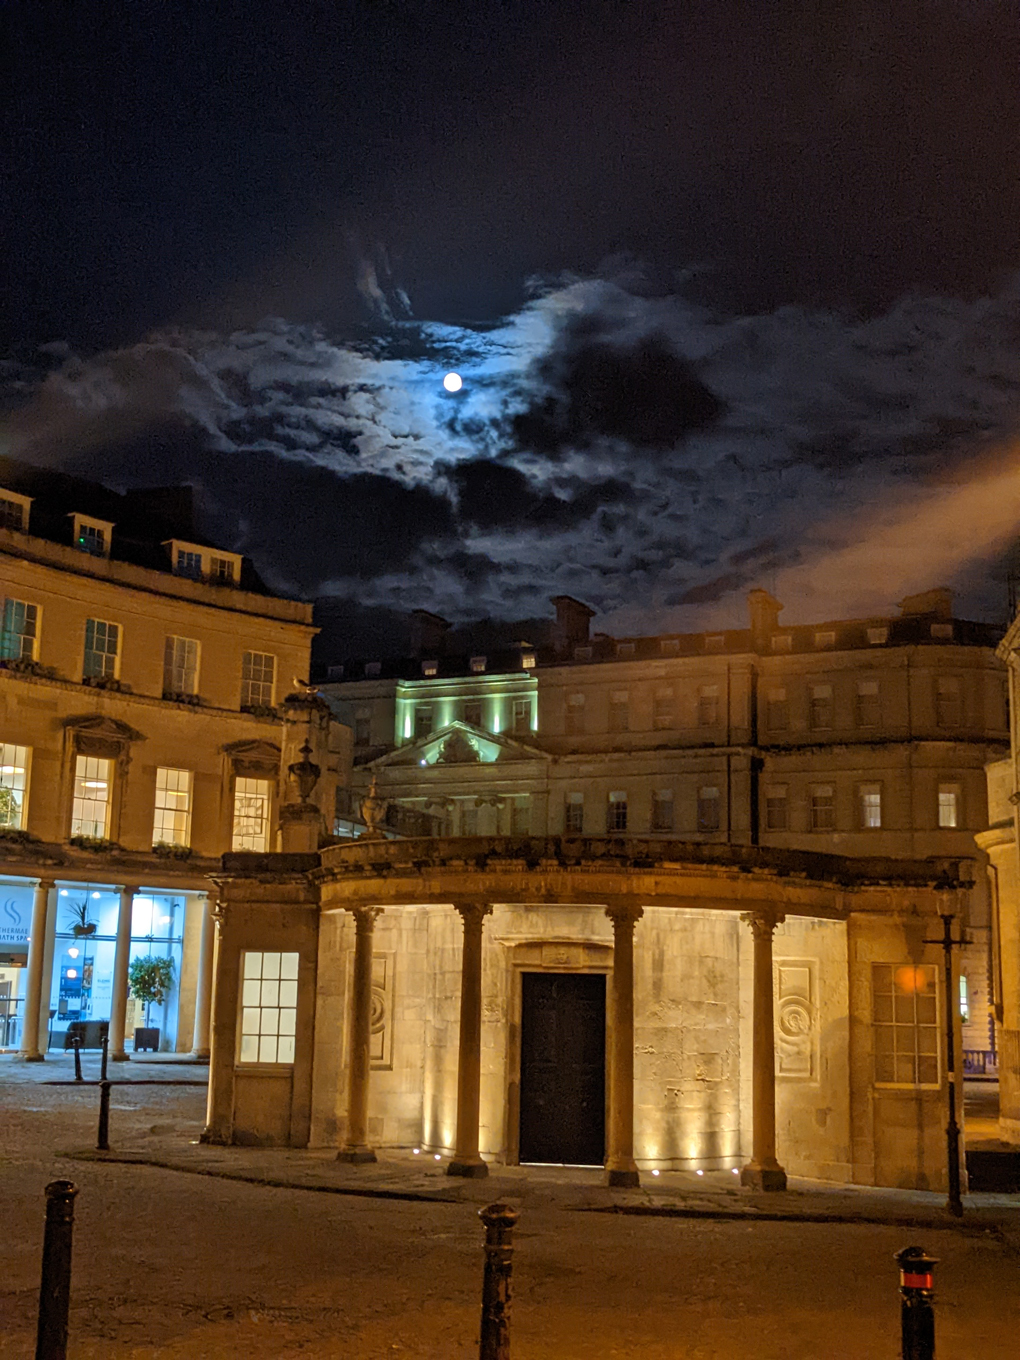 Cross baths lit up at night with moon shining between clouds above